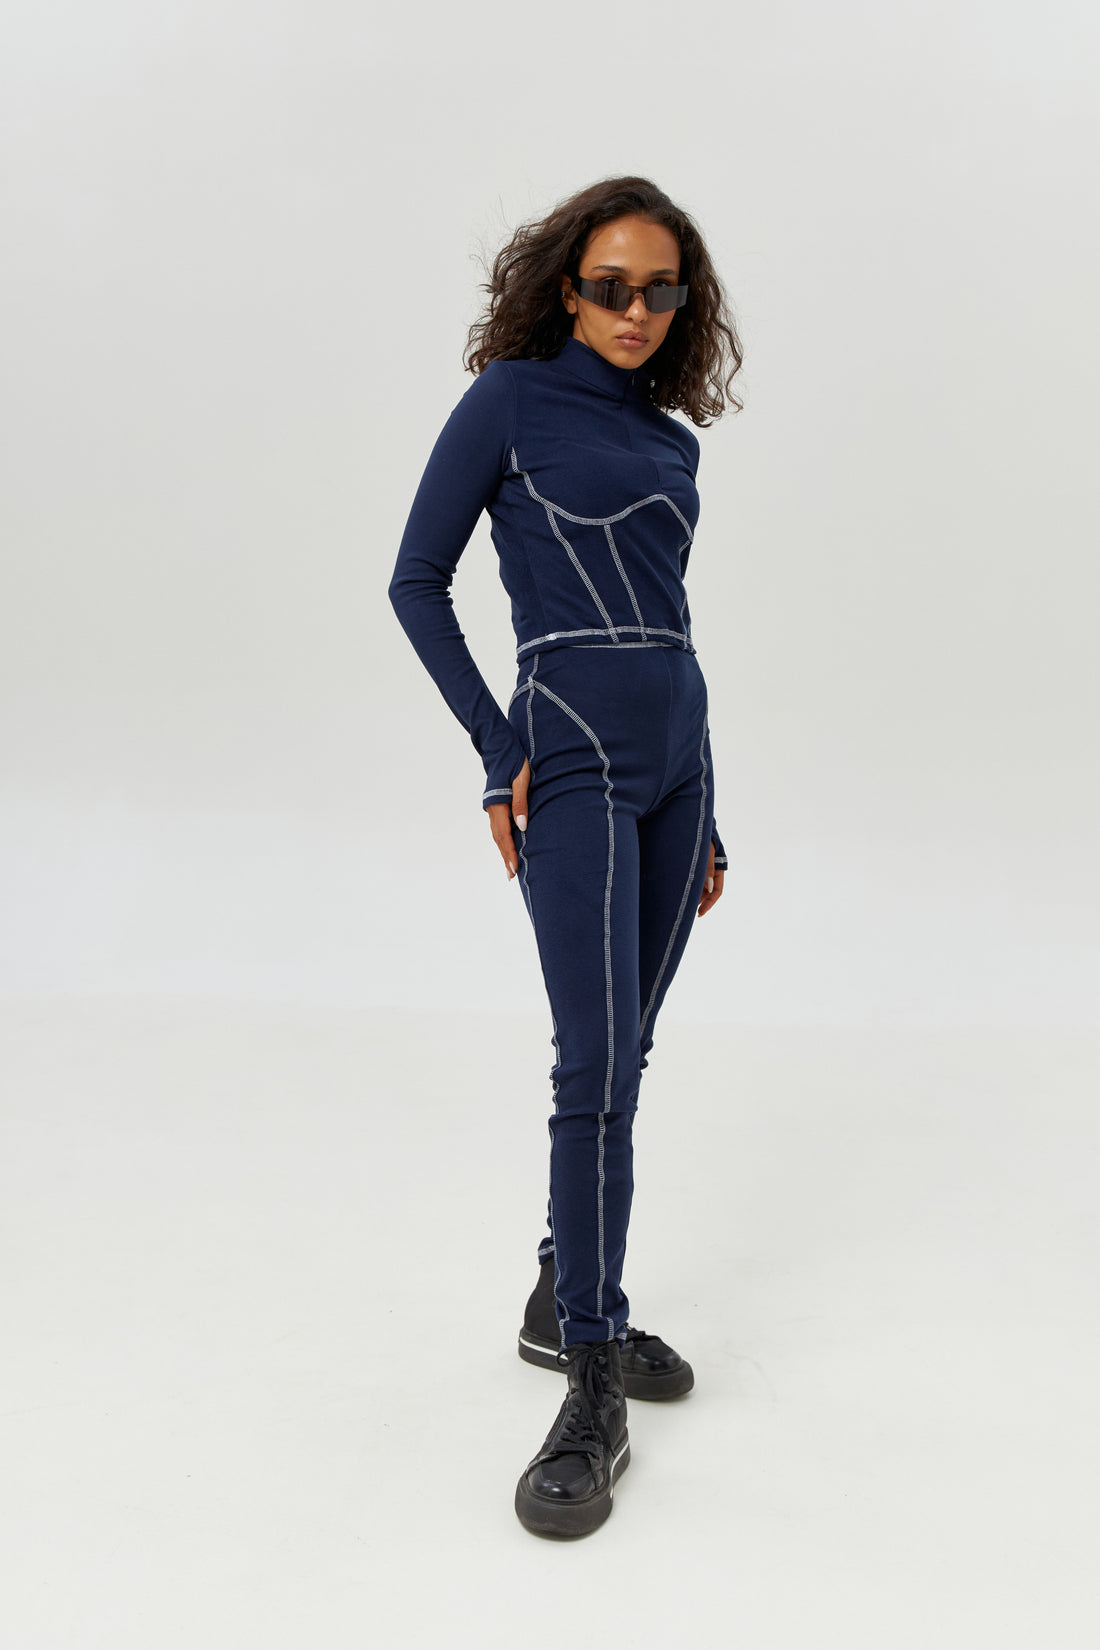 Skiing base layer women's - Black two piece set long johnes - Best thermal  tops